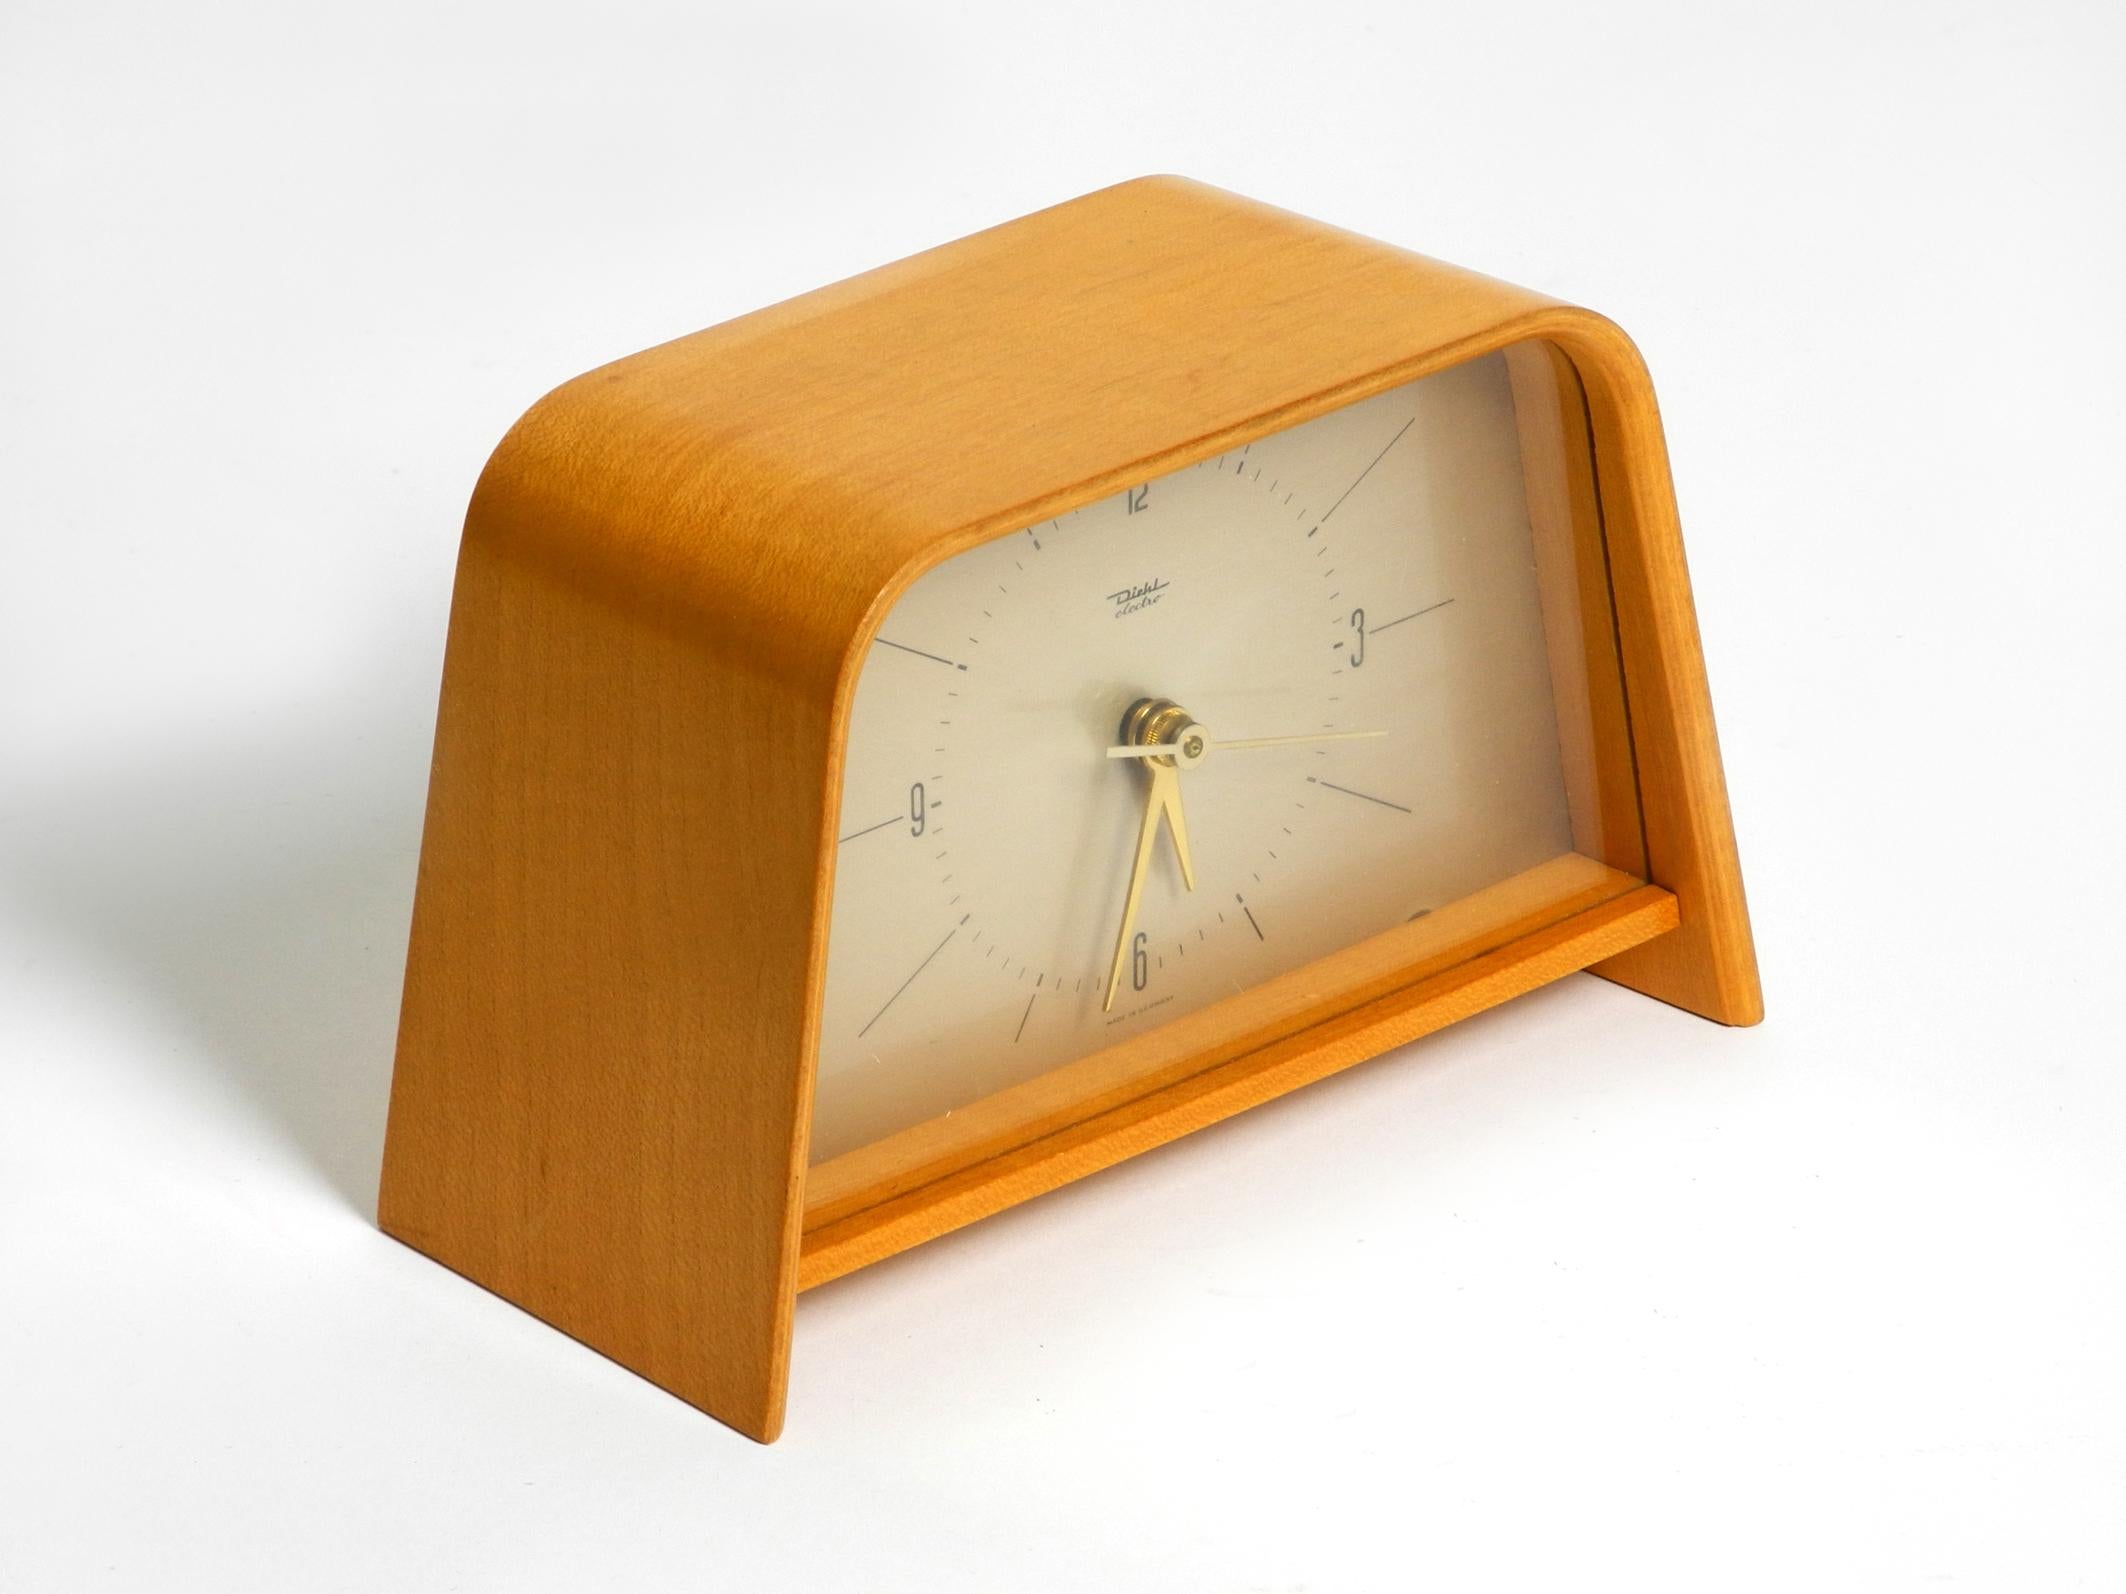 Beautiful original 1950s Diehl Electro table clock with curved teak plywood 6